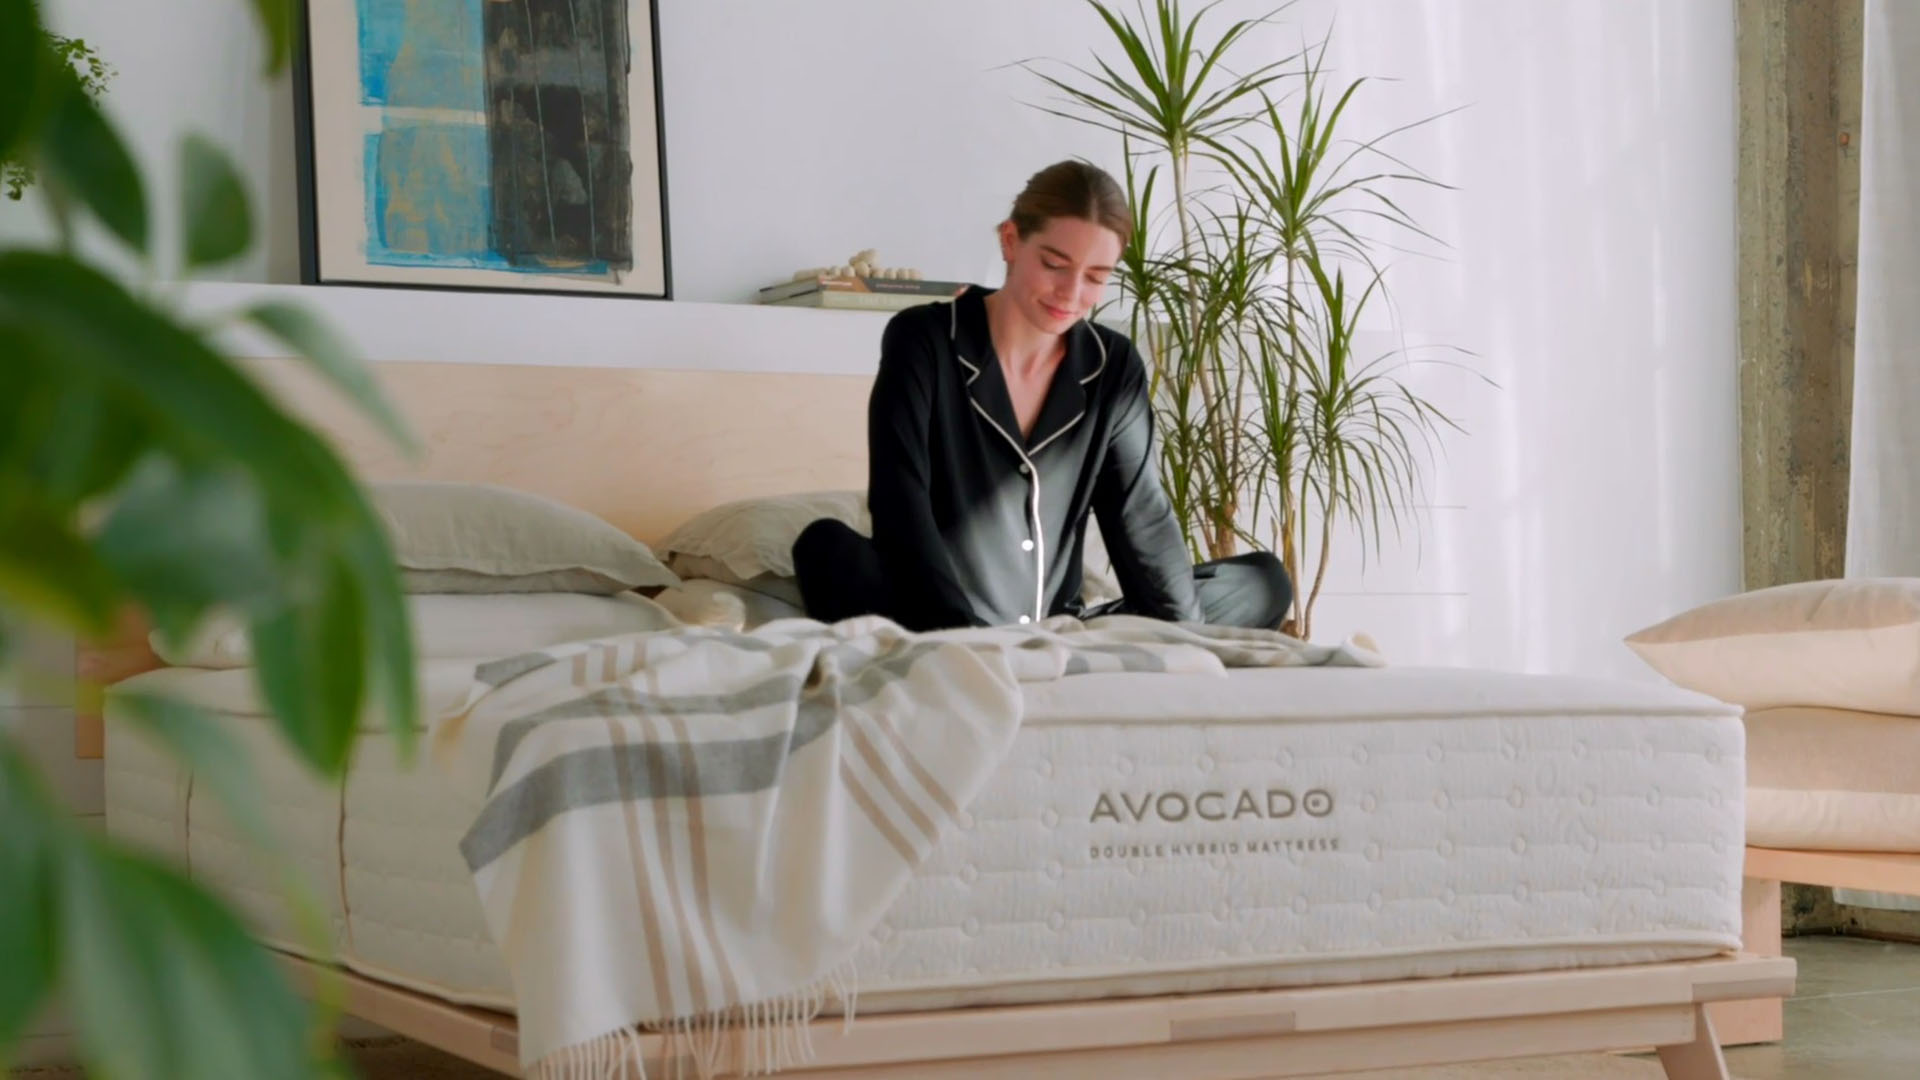 Where to buy Avocado Mattress in Fairfield, Connecticut